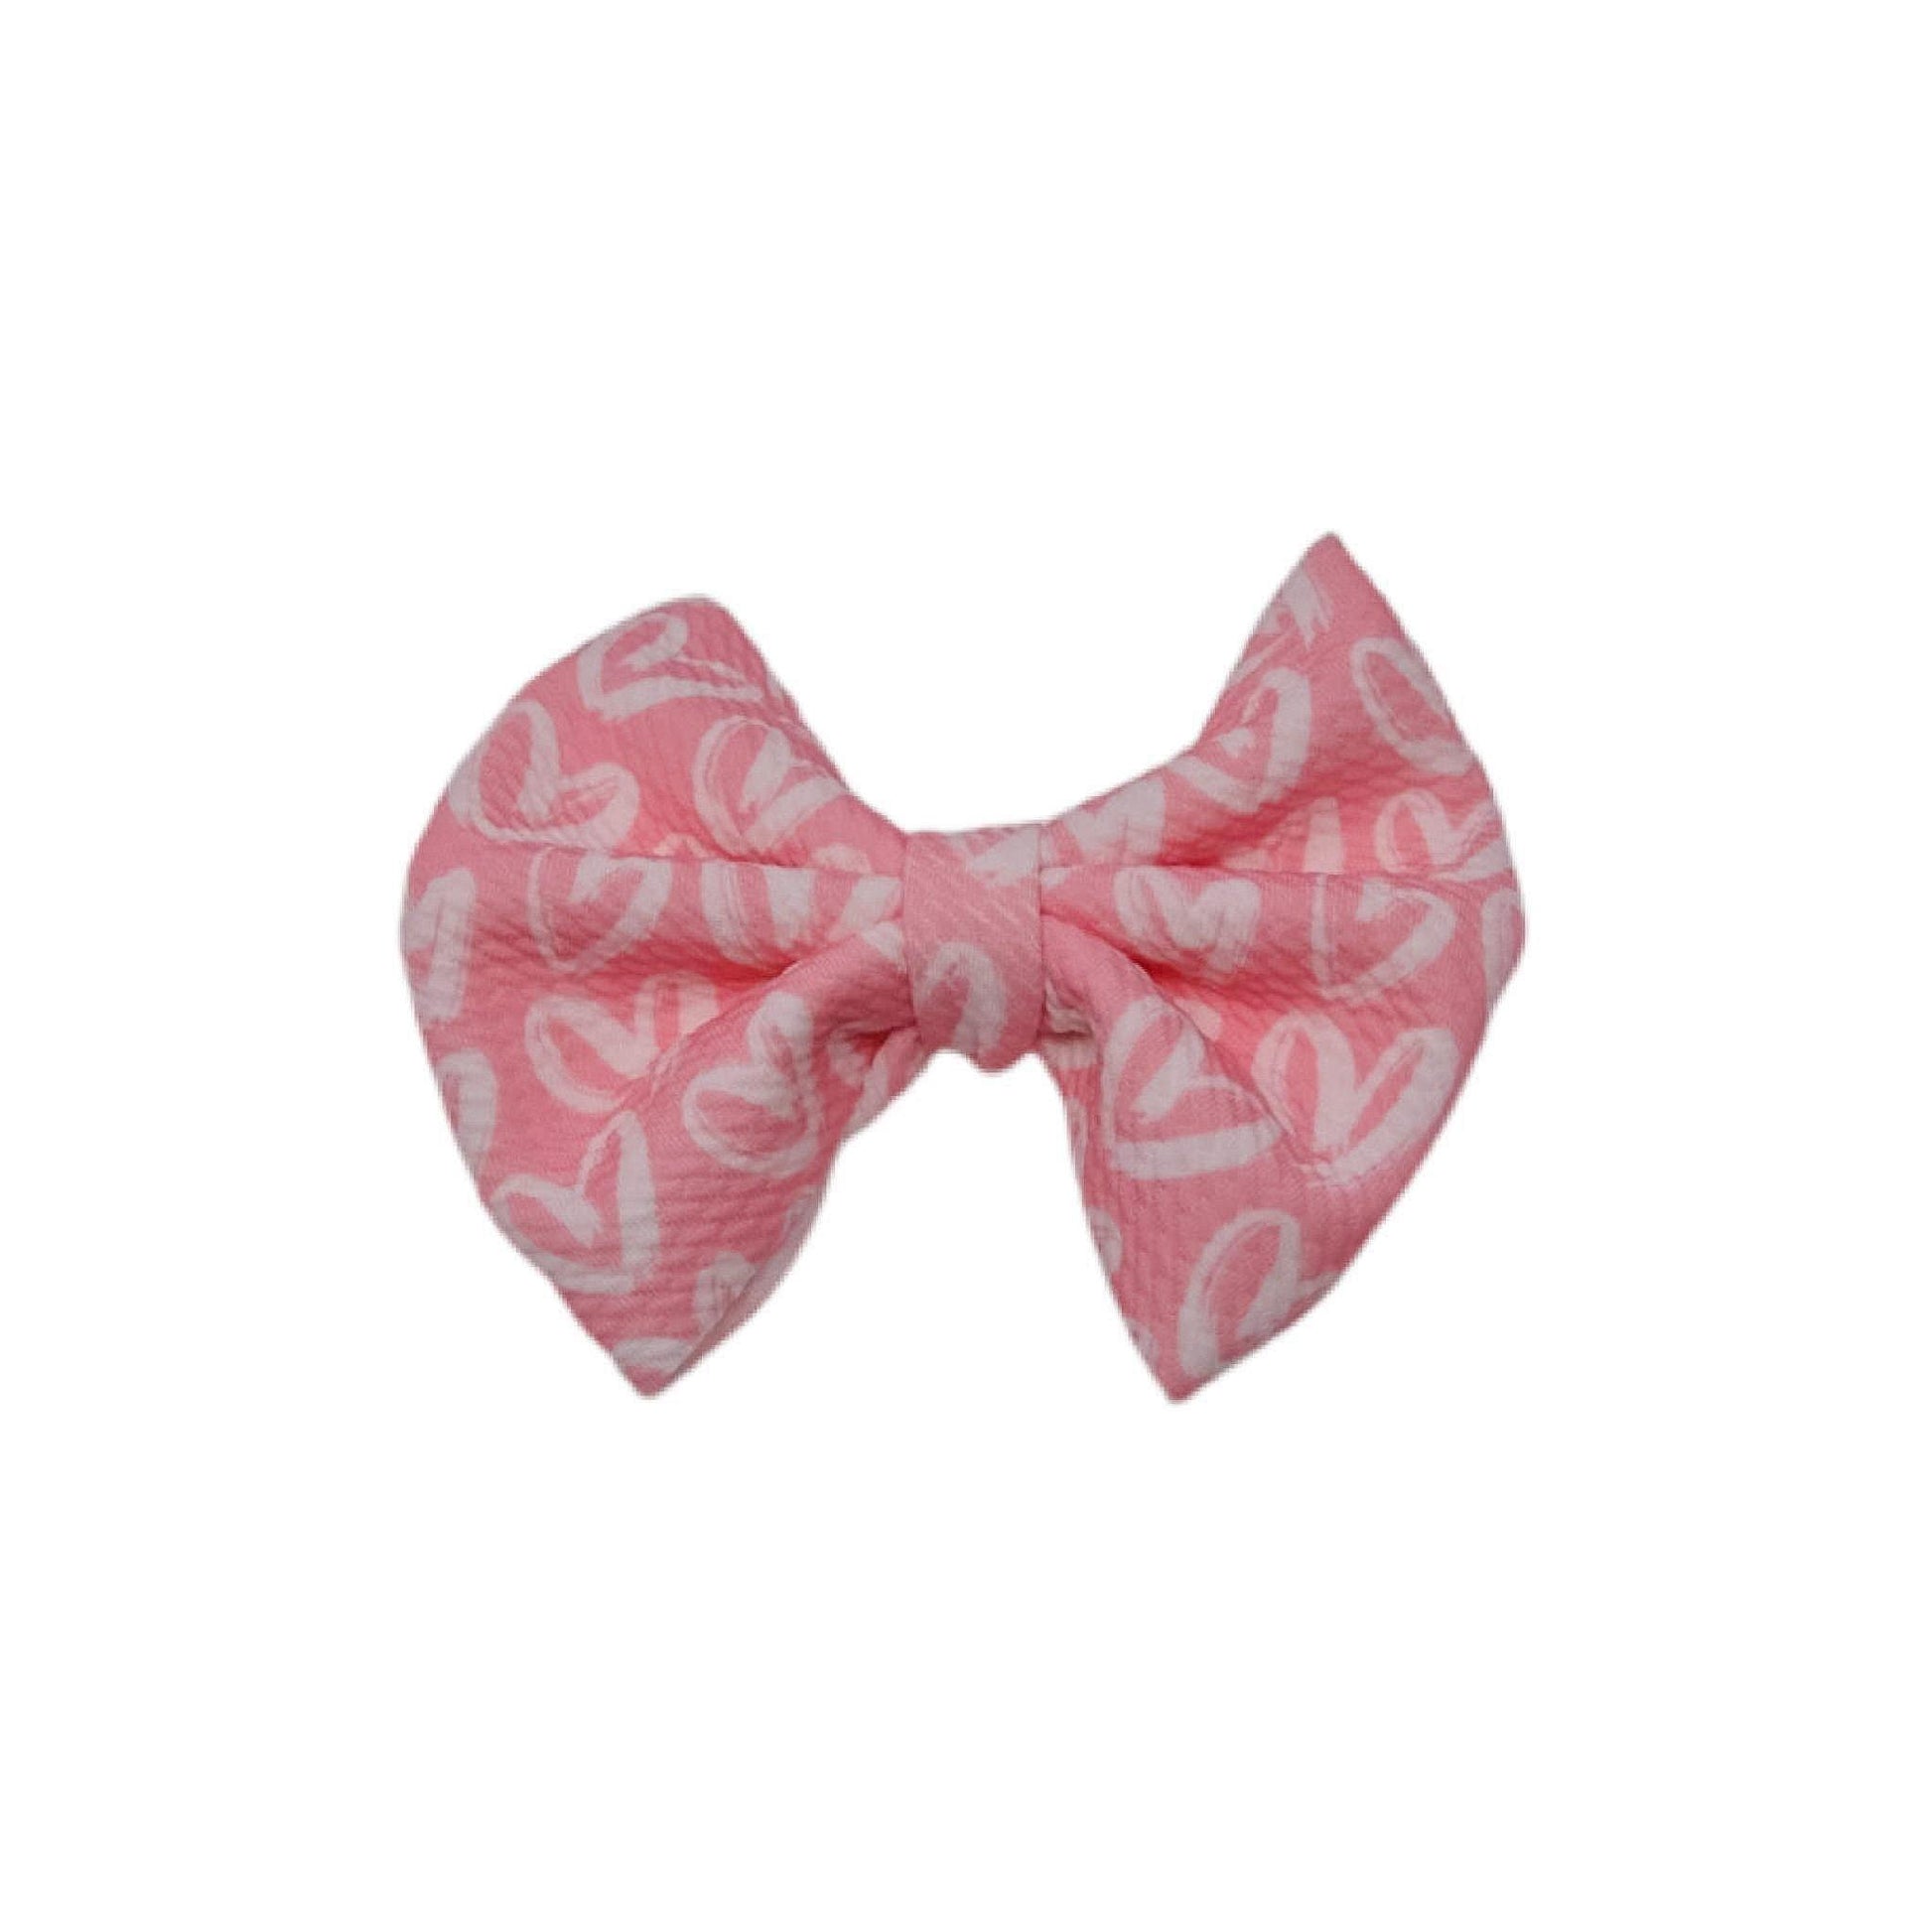 White Hearts on Pink Fabric Bow 5"